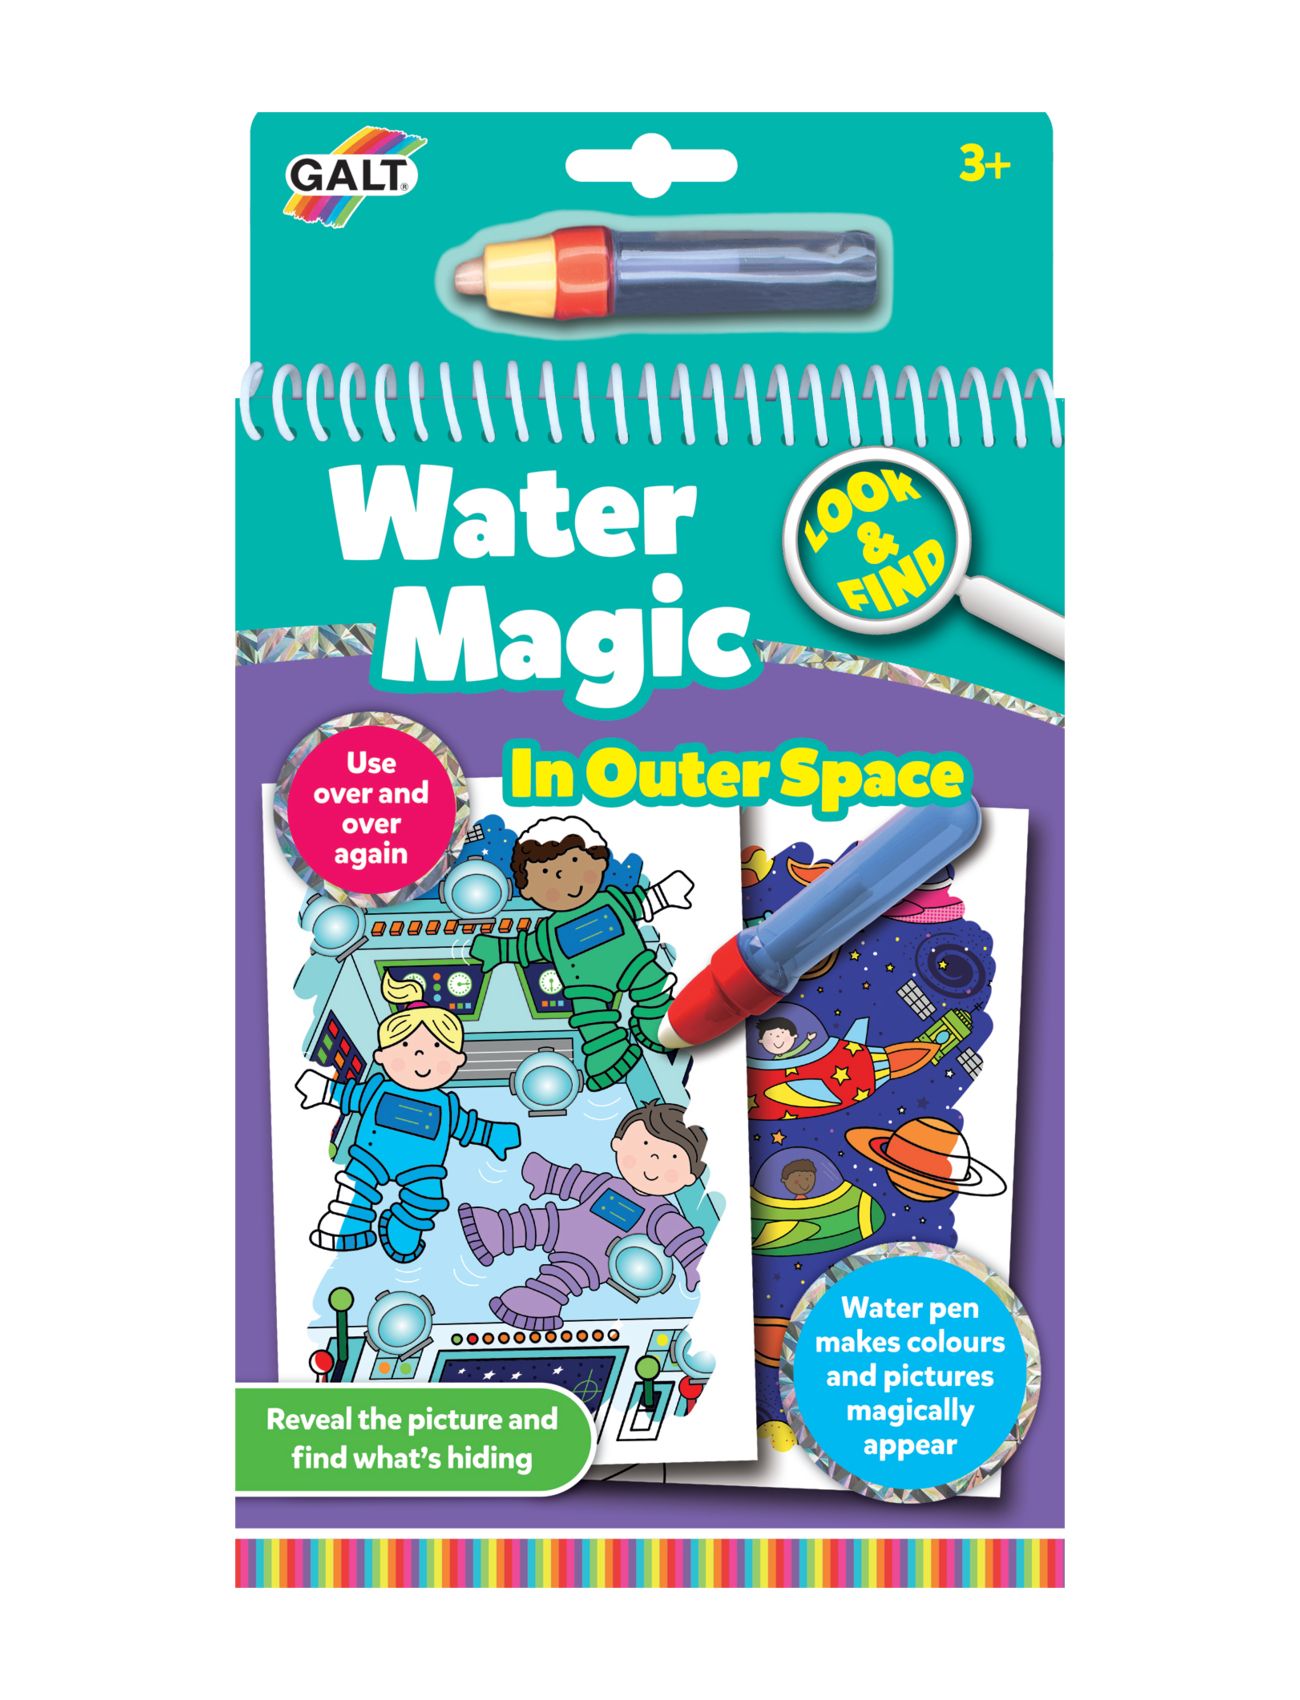 Water Magic - I Rymden Toys Creativity Drawing & Crafts Drawing Coloring & Craft Books Multi/mönstrad Galt